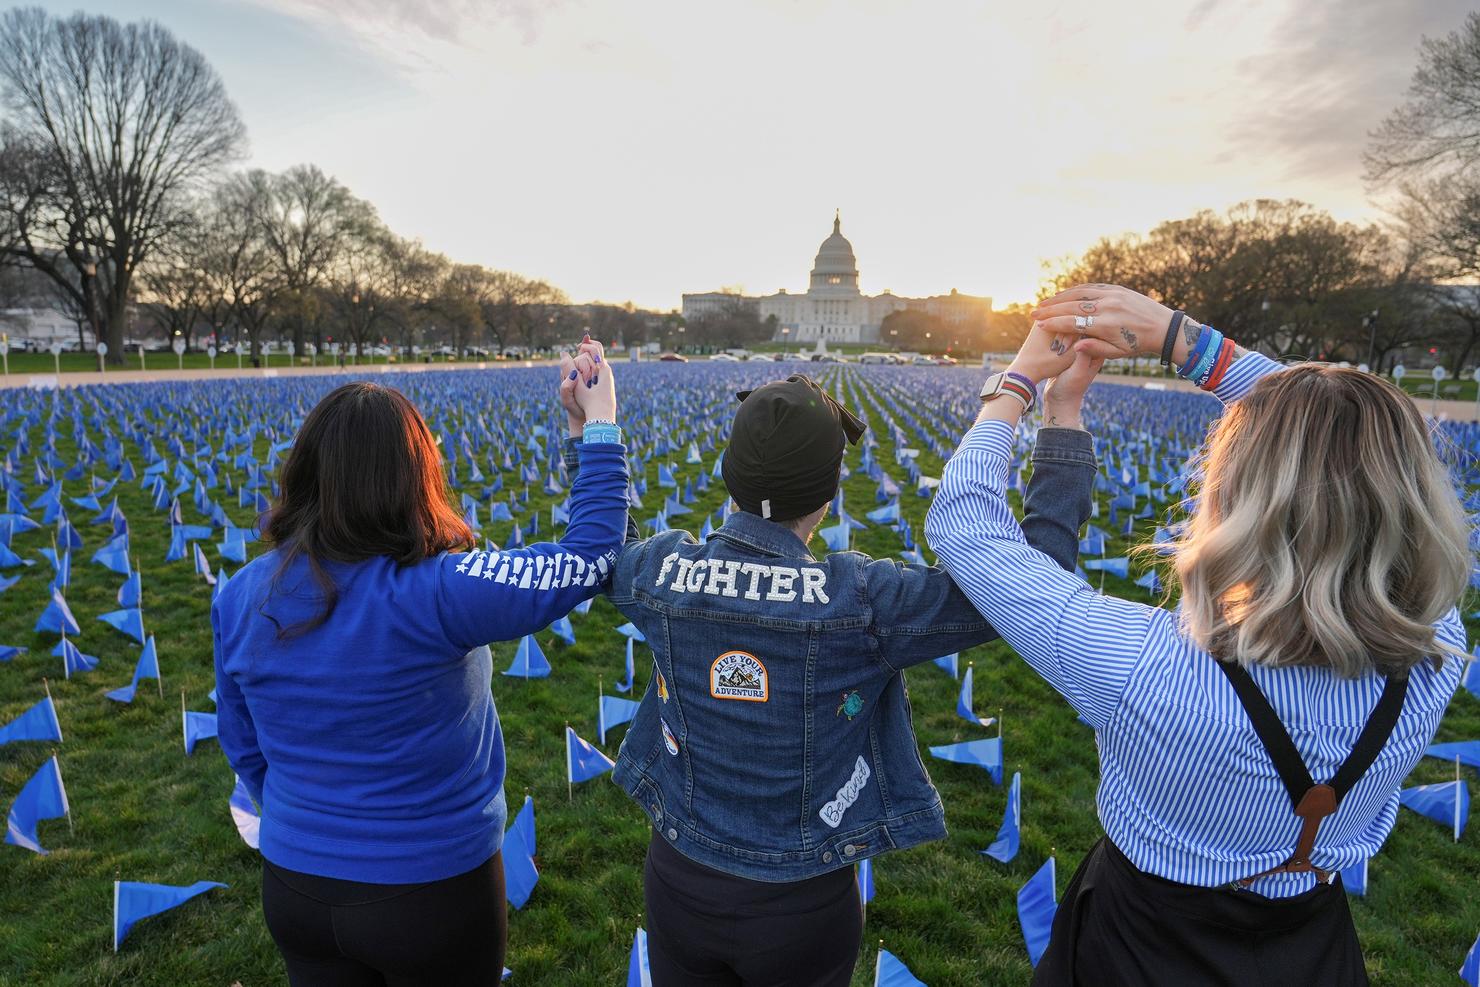 Three people stand together with their arms raised in front of thousands of blue flags on the National Mall in front of the U.S. Capitol